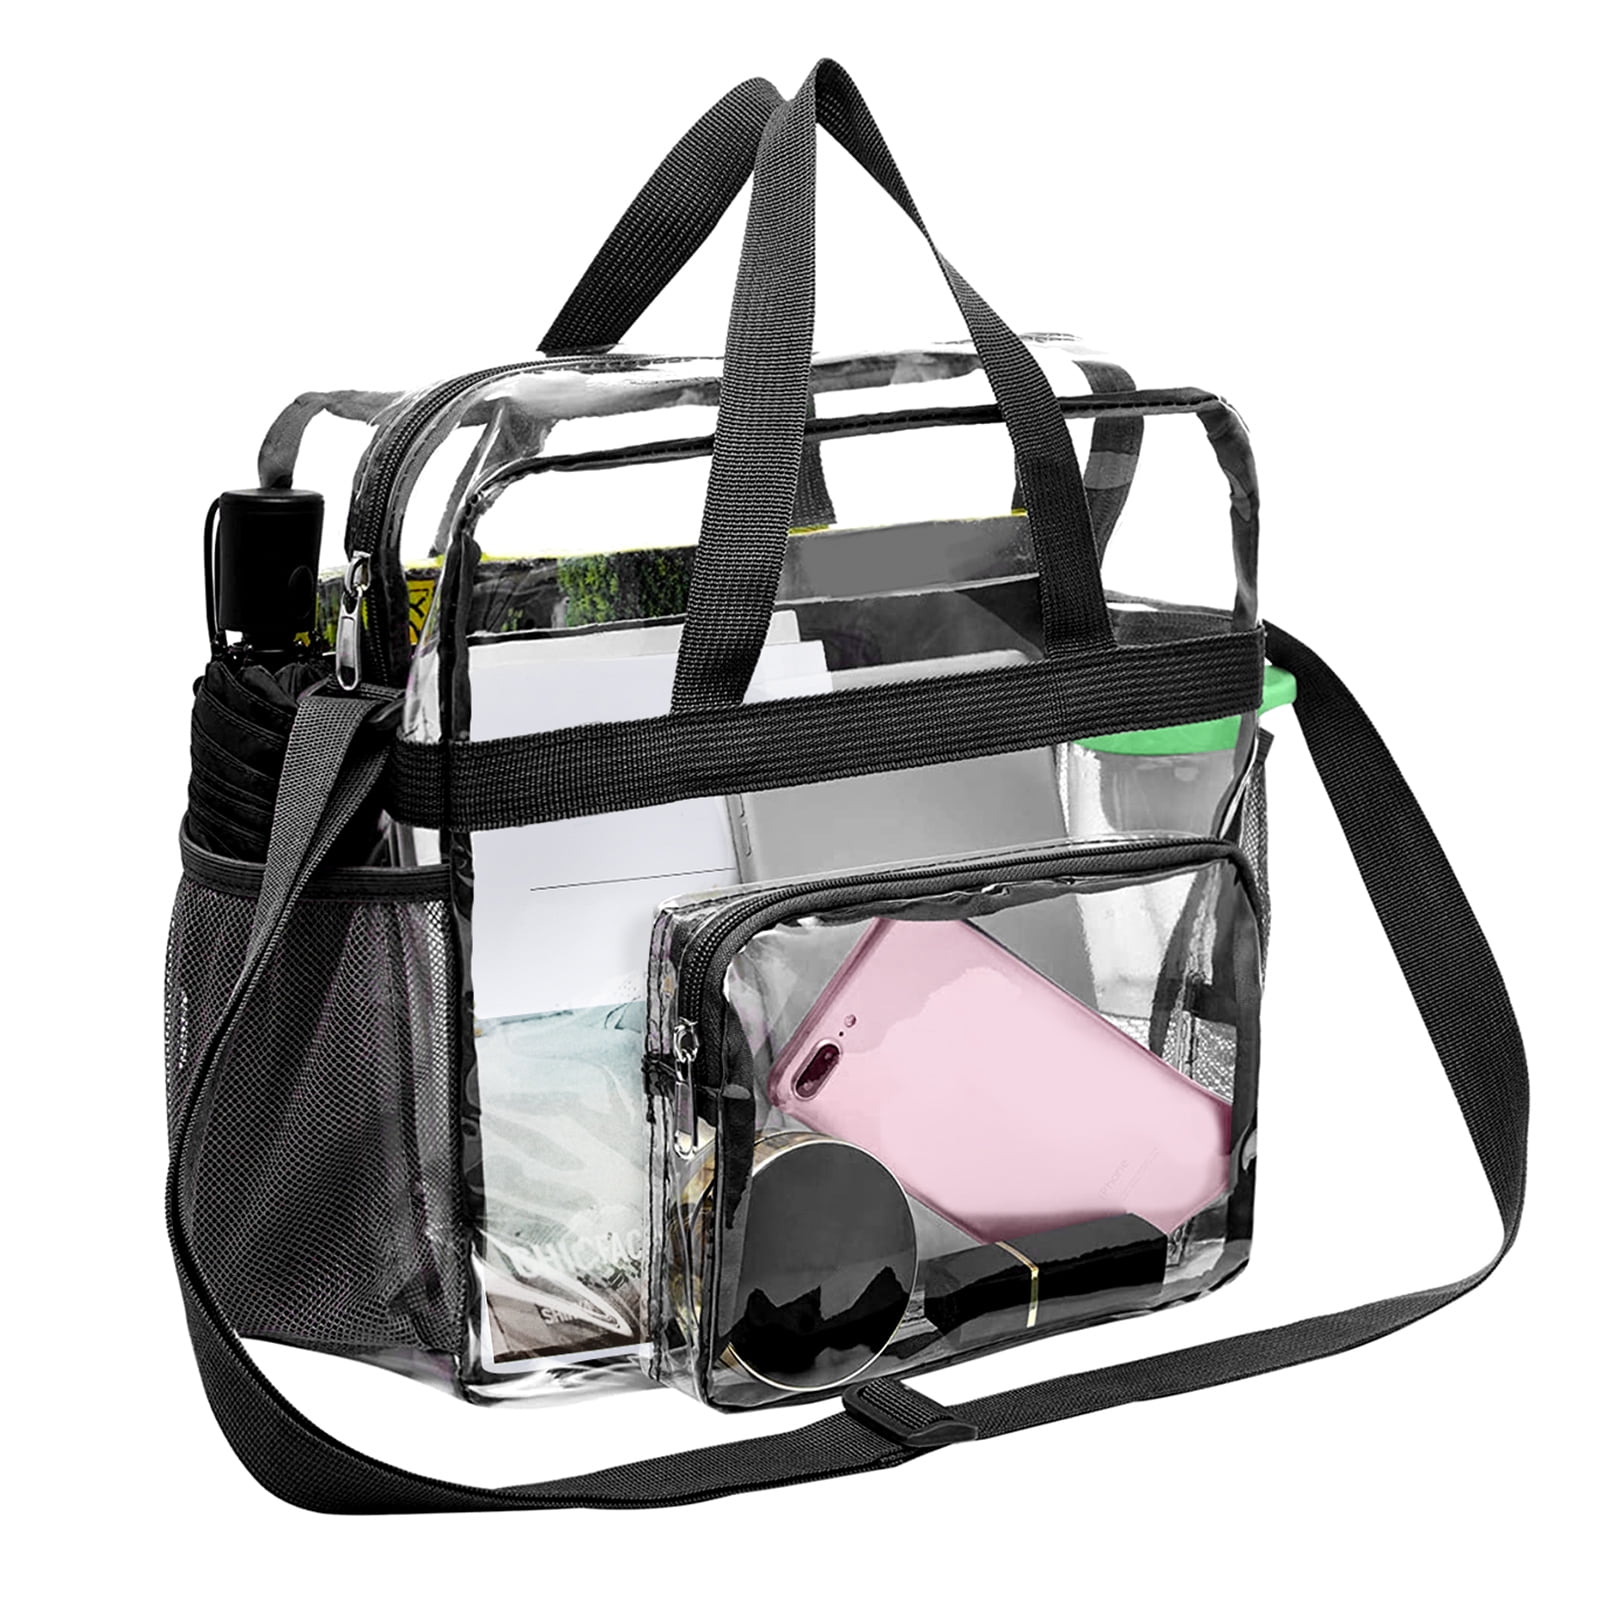 TSV Clear Tote Bag Large Waterproof Clear Crossbody Bag with Adjustable Strap for Stadium Travel Handbag 12x12x6 f545e908 7708 48b8 93cc 12946a3f1923.151794c24a8f50171199e6d0ff235e71